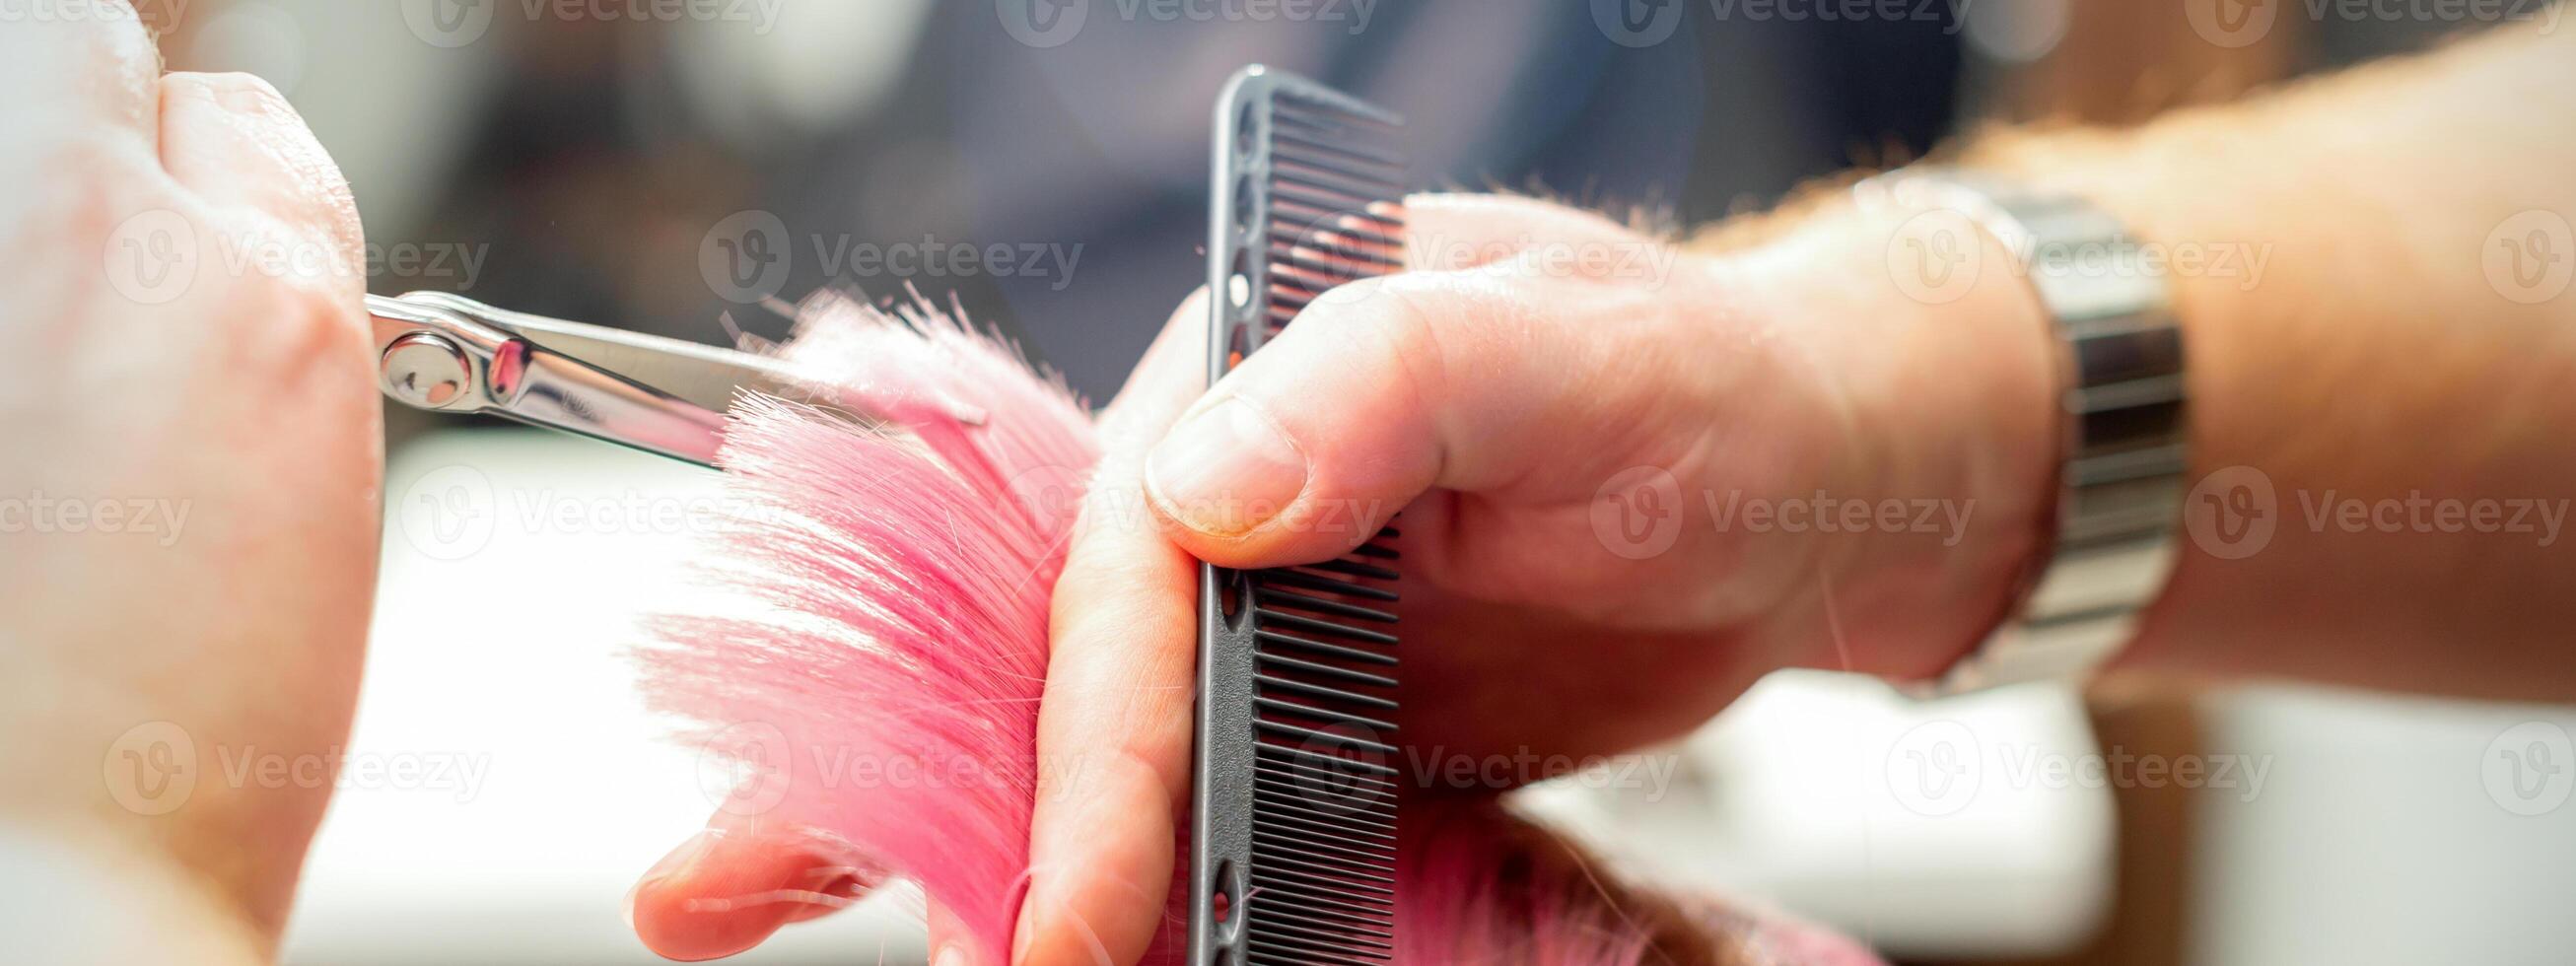 Woman having a new haircut. Male hairstylist cutting pink hair with scissors in a hair salon, close up. photo